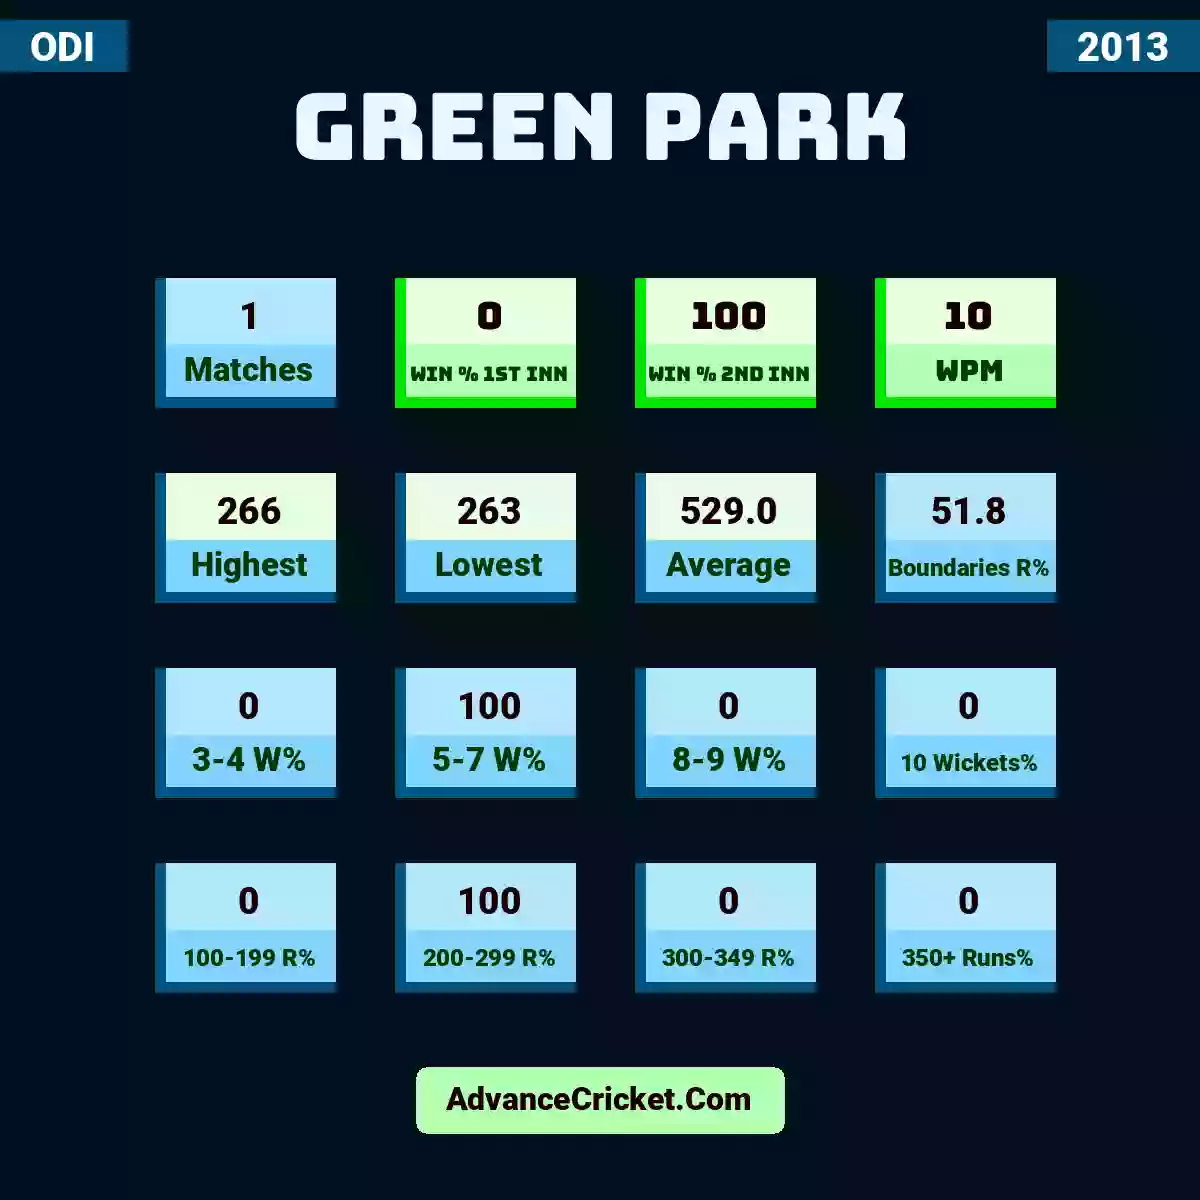 Image showing Green Park with Matches: 1, Win % 1st Inn: 0, Win % 2nd Inn: 100, WPM: 10, Highest: 266, Lowest: 263, Average: 529.0, Boundaries R%: 51.8, 3-4 W%: 0, 5-7 W%: 100, 8-9 W%: 0, 10 Wickets%: 0, 100-199 R%: 0, 200-299 R%: 100, 300-349 R%: 0, 350+ Runs%: 0.